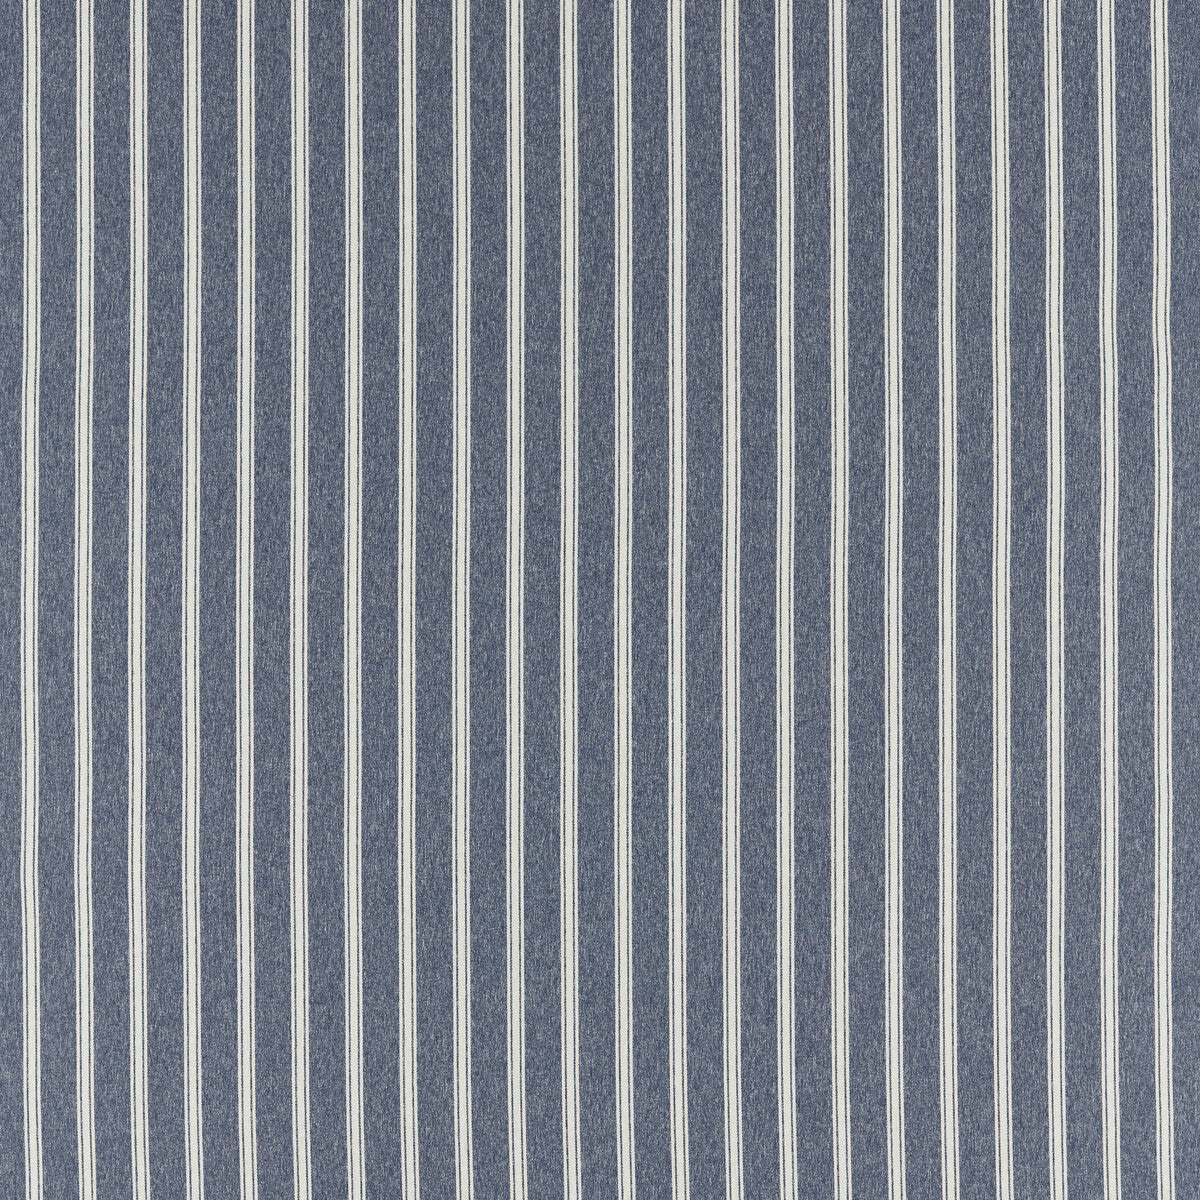 Anderson fabric in midnight color - pattern F1567/03.CAC.0 - by Clarke And Clarke in the Clarke &amp; Clarke Burlington collection